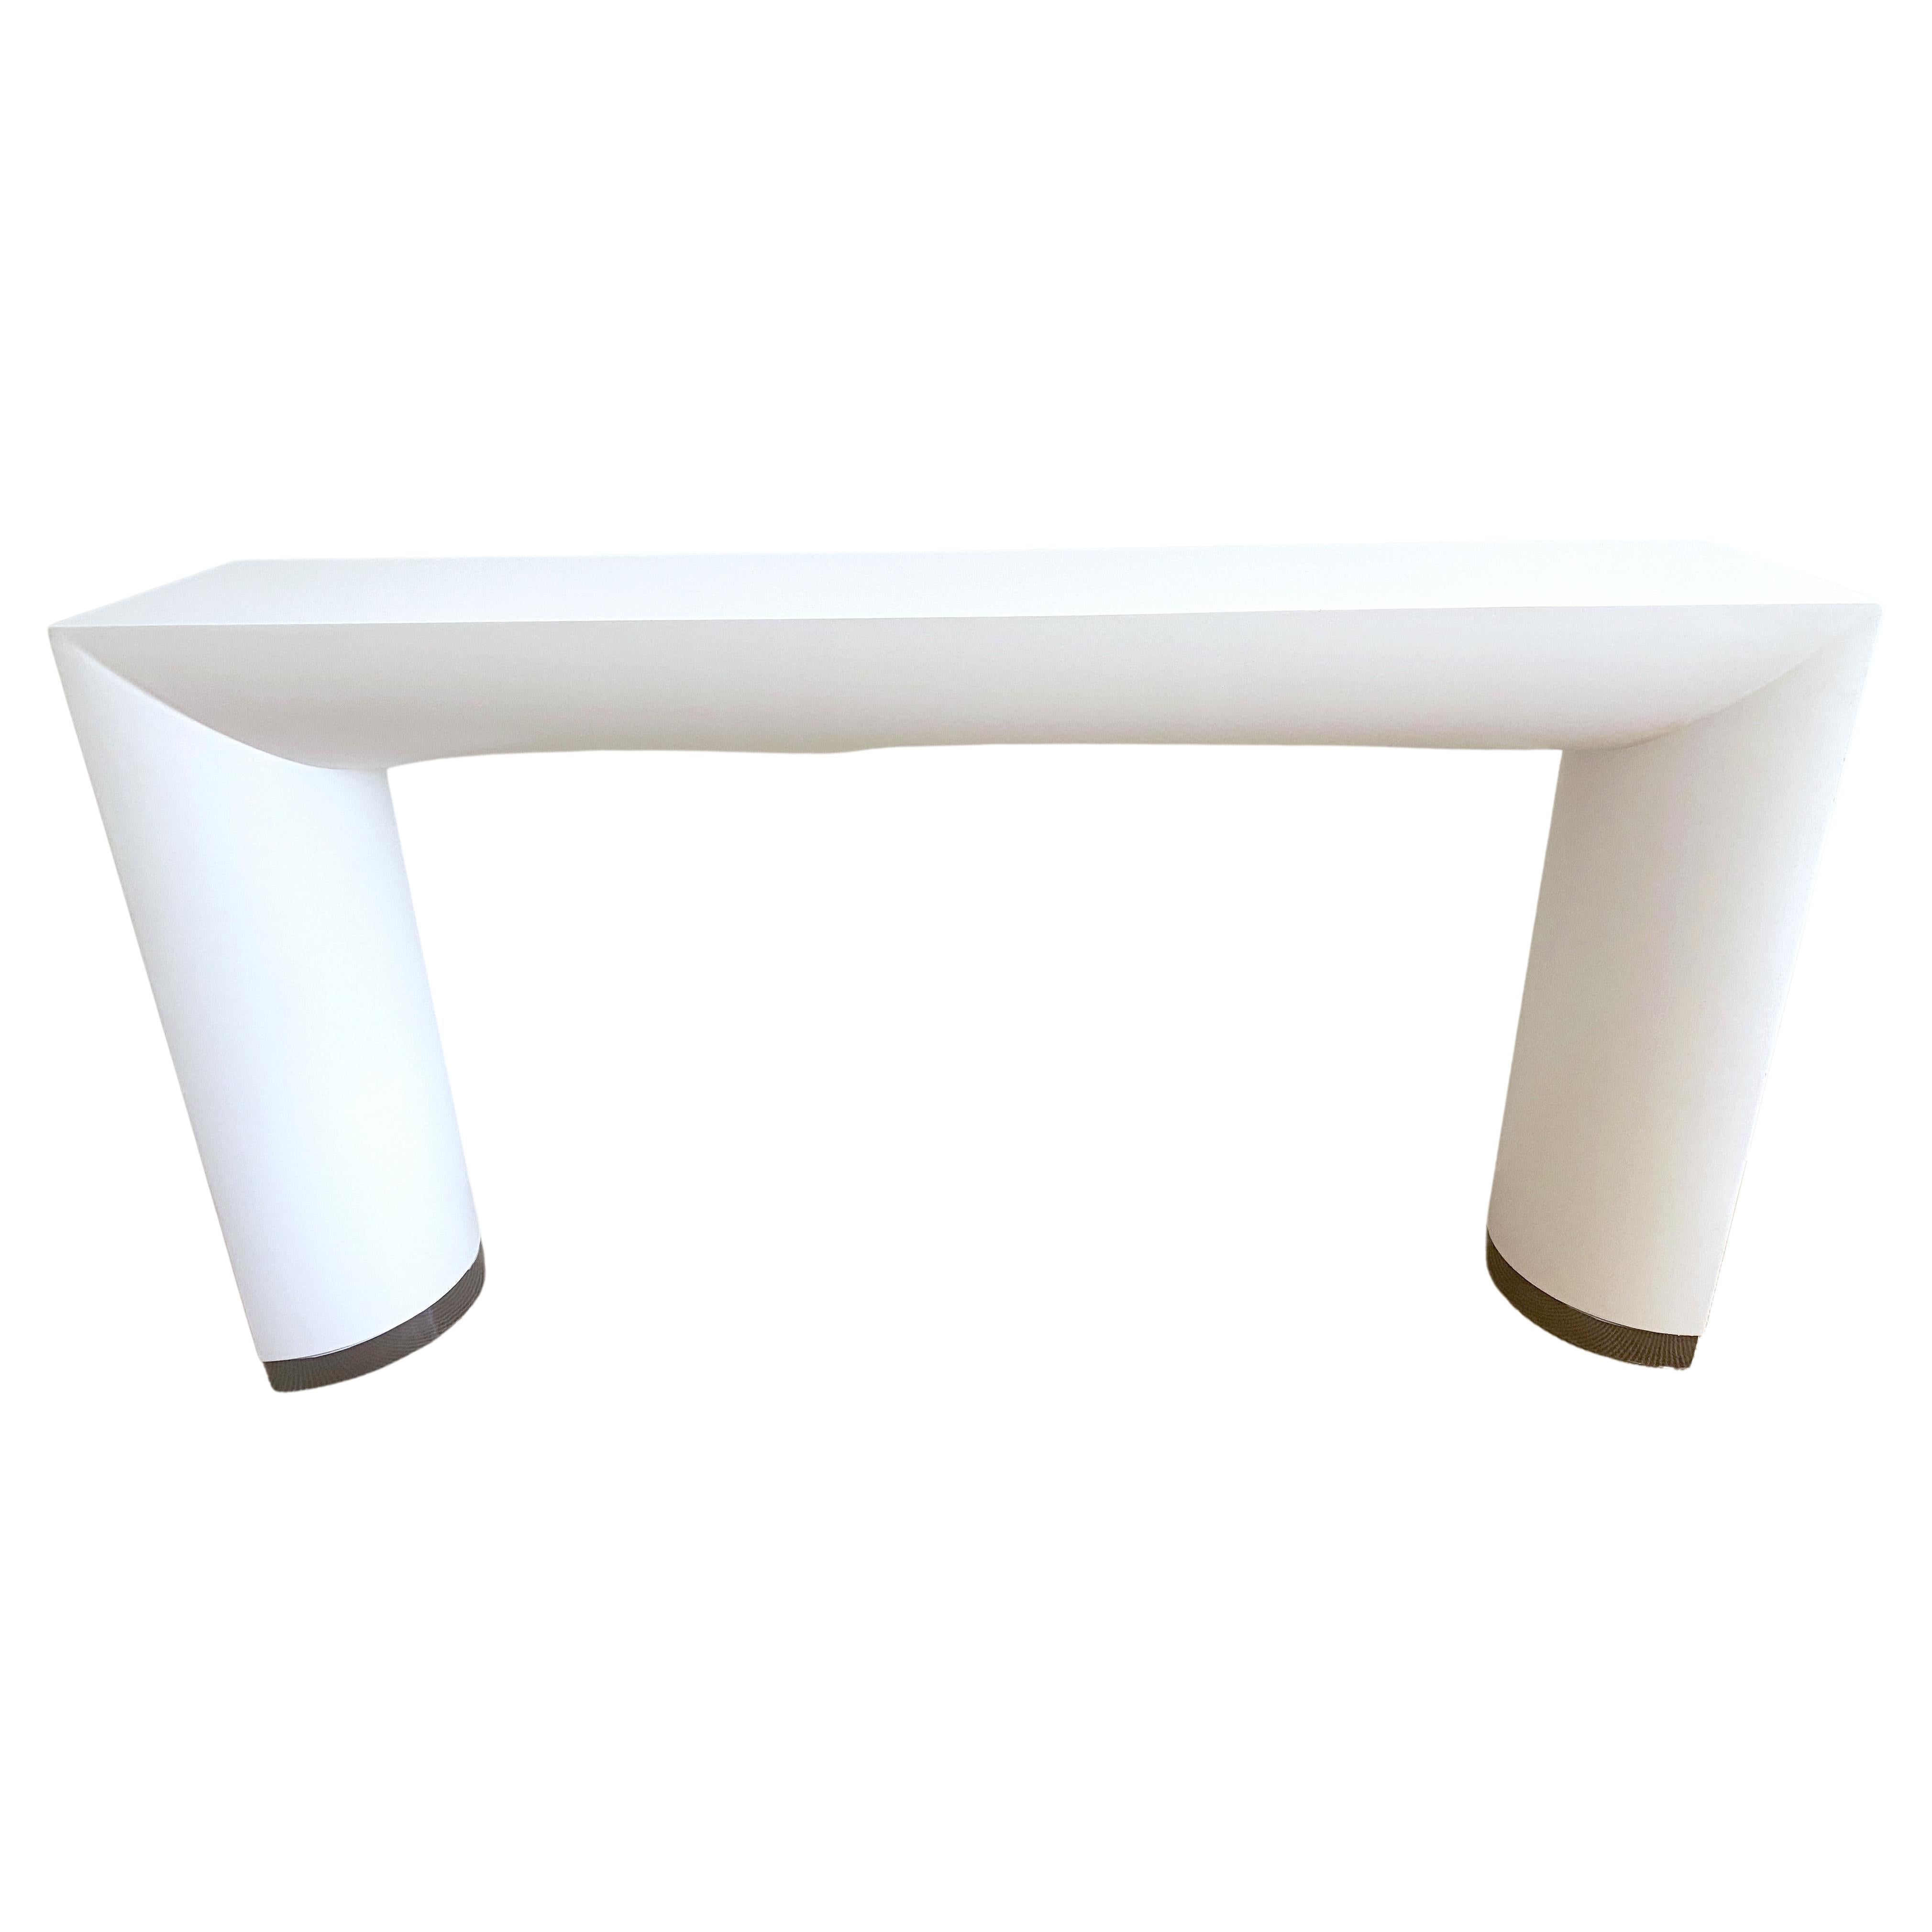 Large White Lacquer Style of Springer 'I-Beam' Console Table, C 1980s